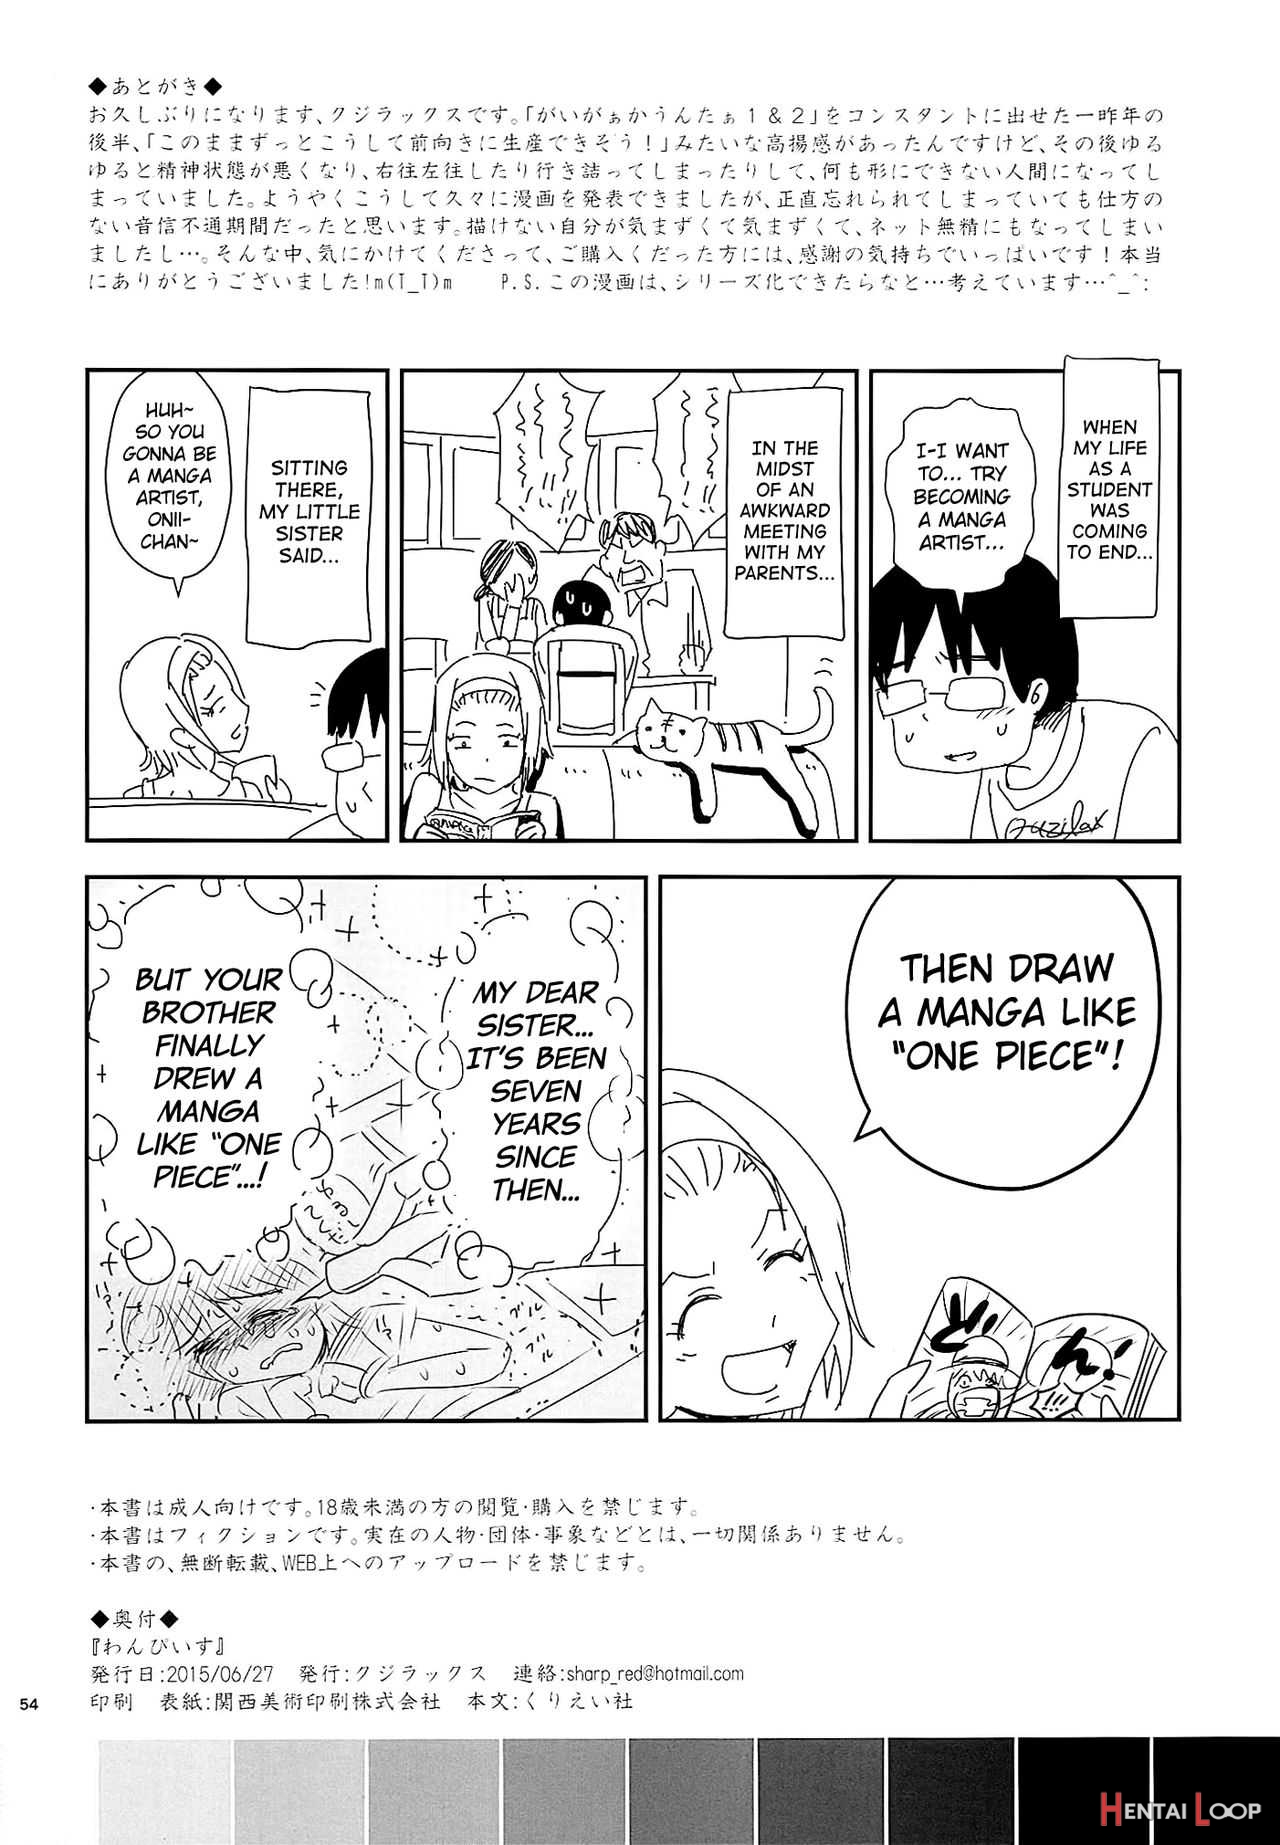 One Piece page 54